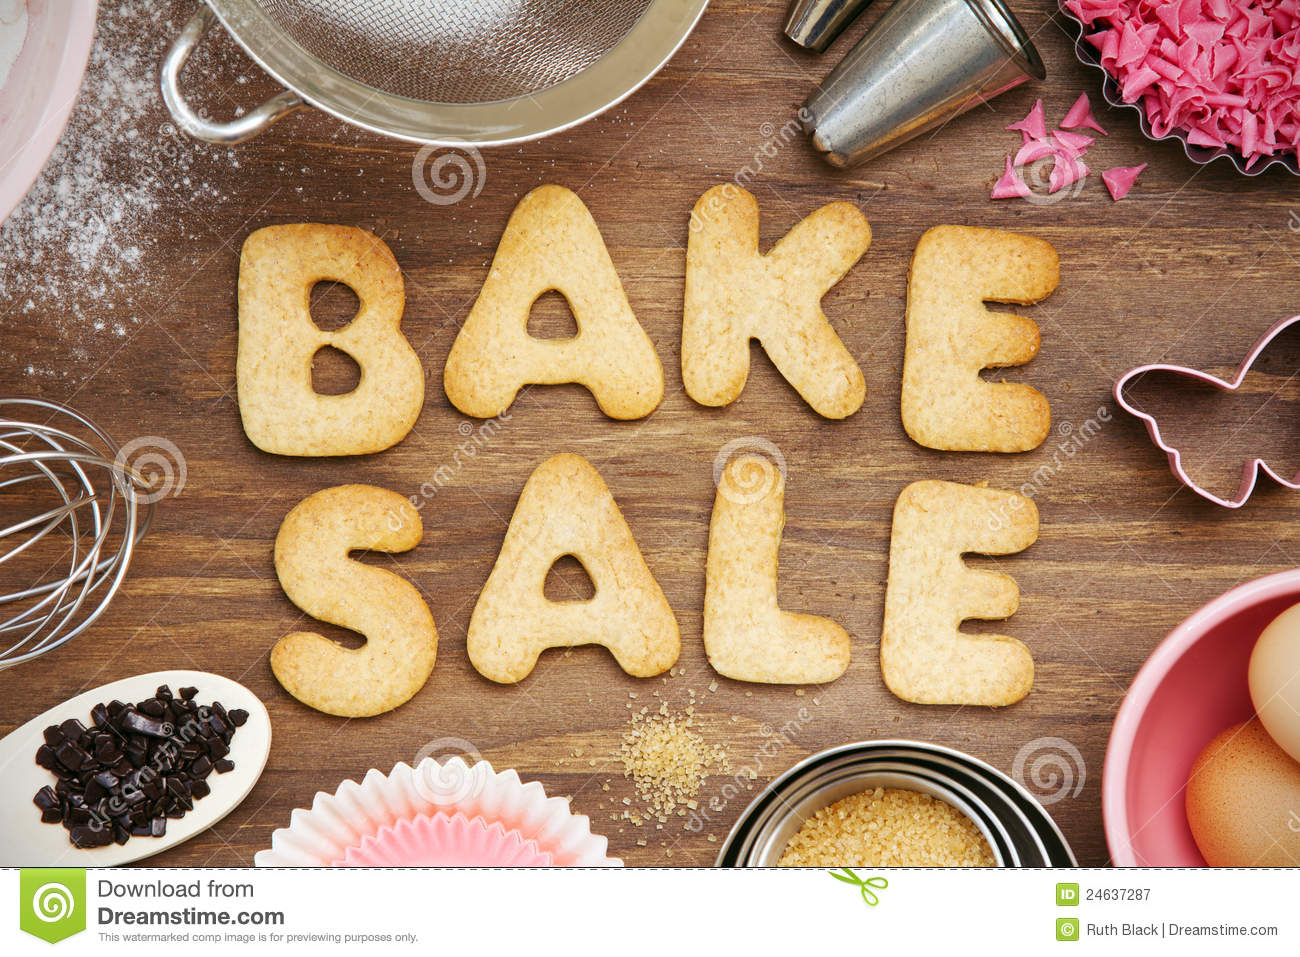 Bake Sale Cookies Royalty Free Stock Photography   Image  24637287